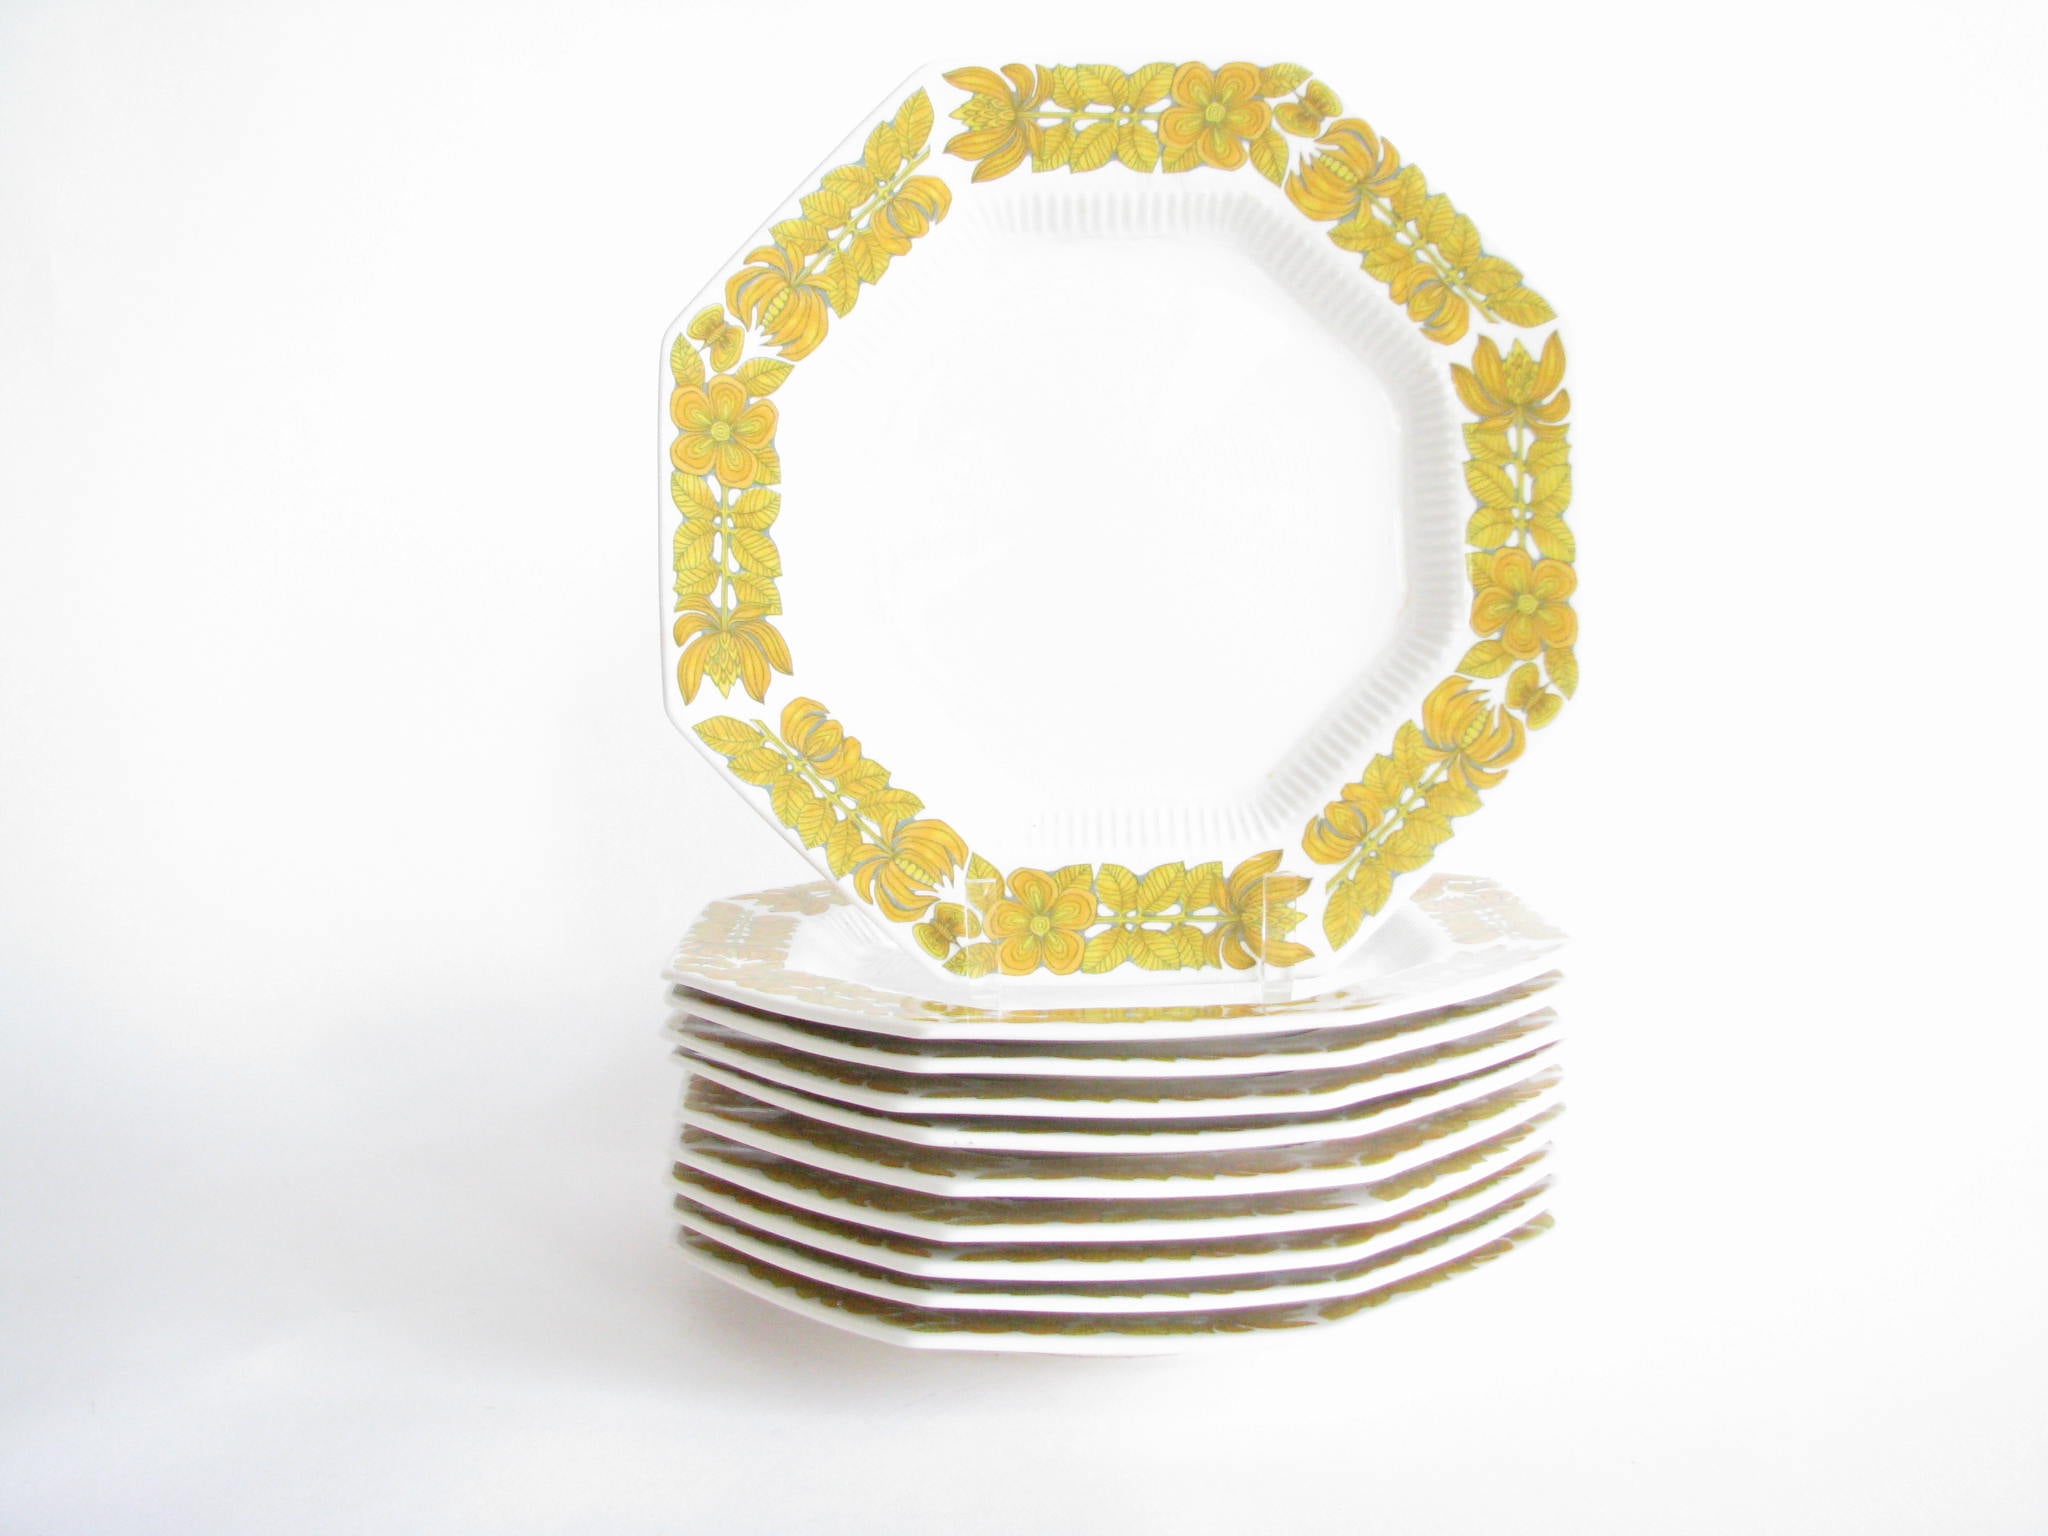 edgebrookhouse - 1970s Independence Ironstone White Octagon Dinner Plates with Yellow Floral Rim - Set of 10